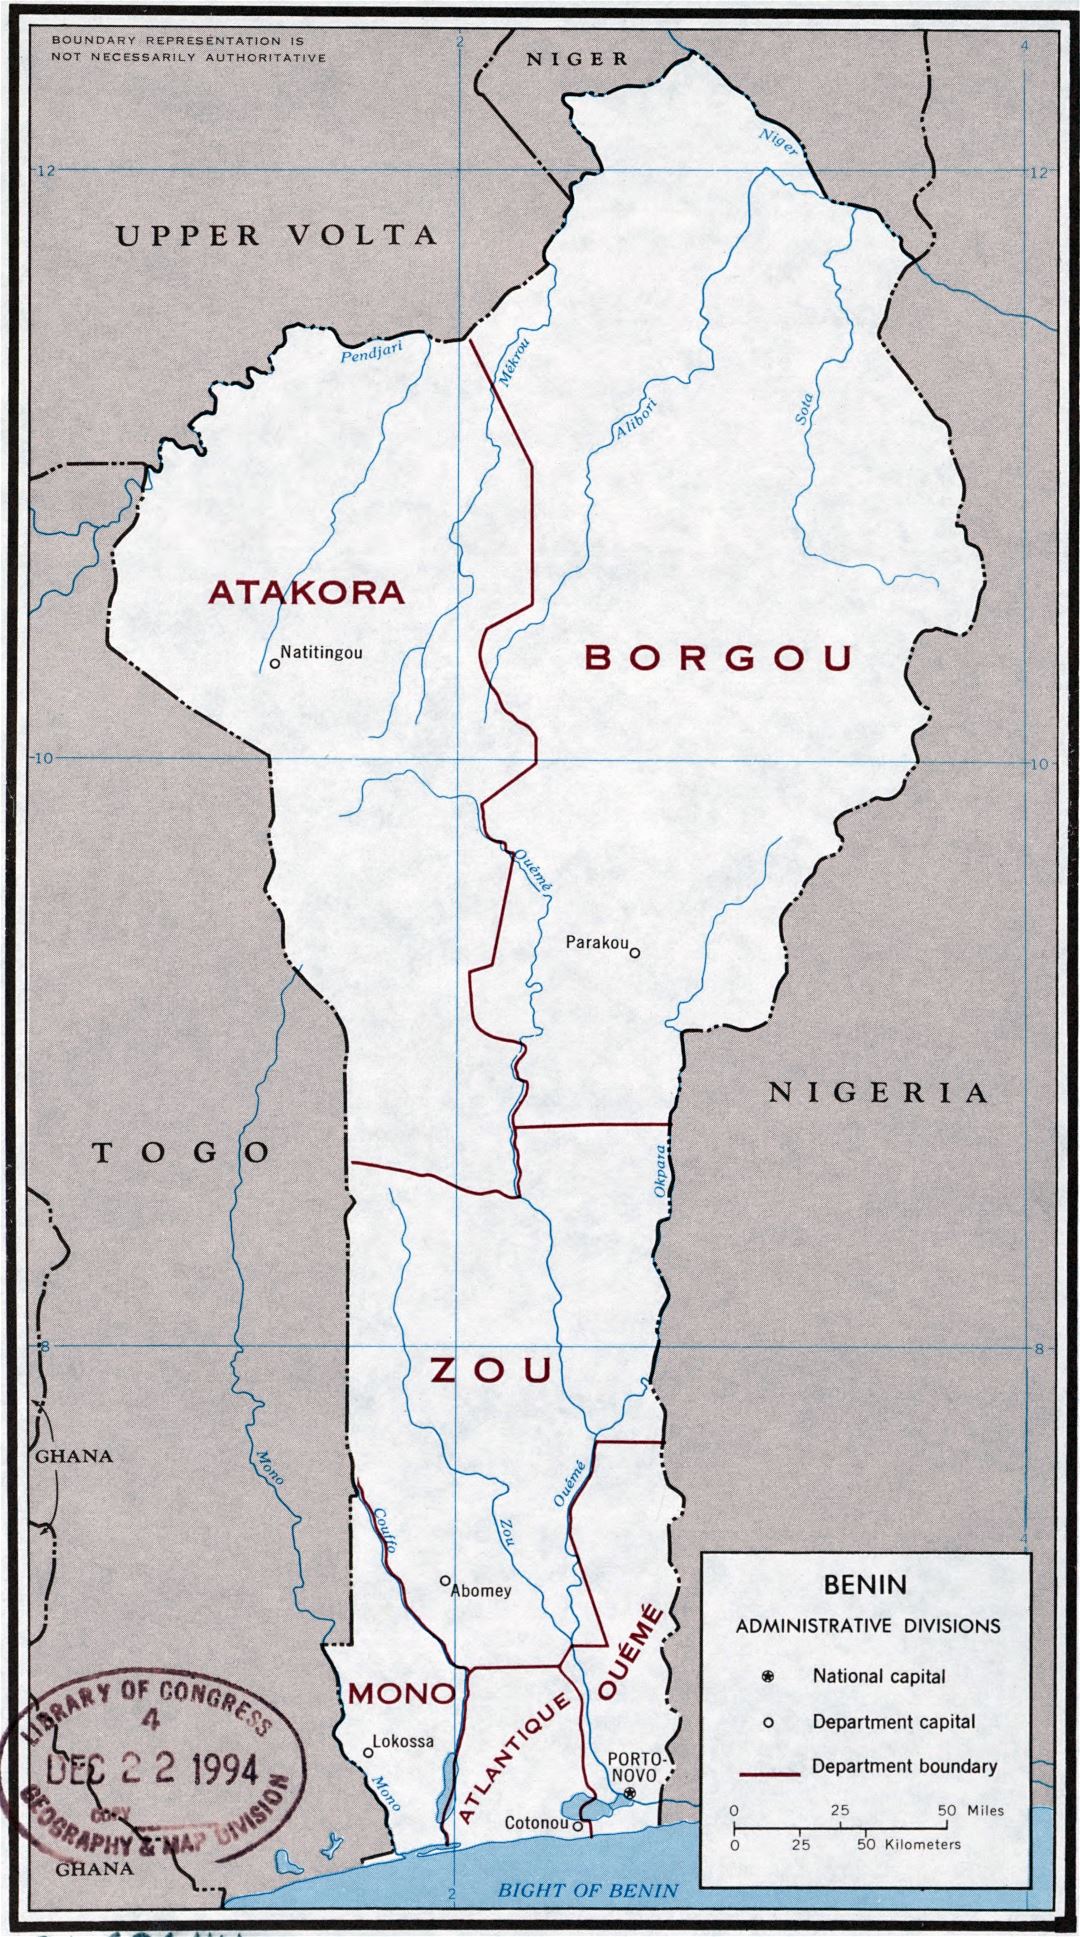 Large scale administrative divisions map of Benin - 1977